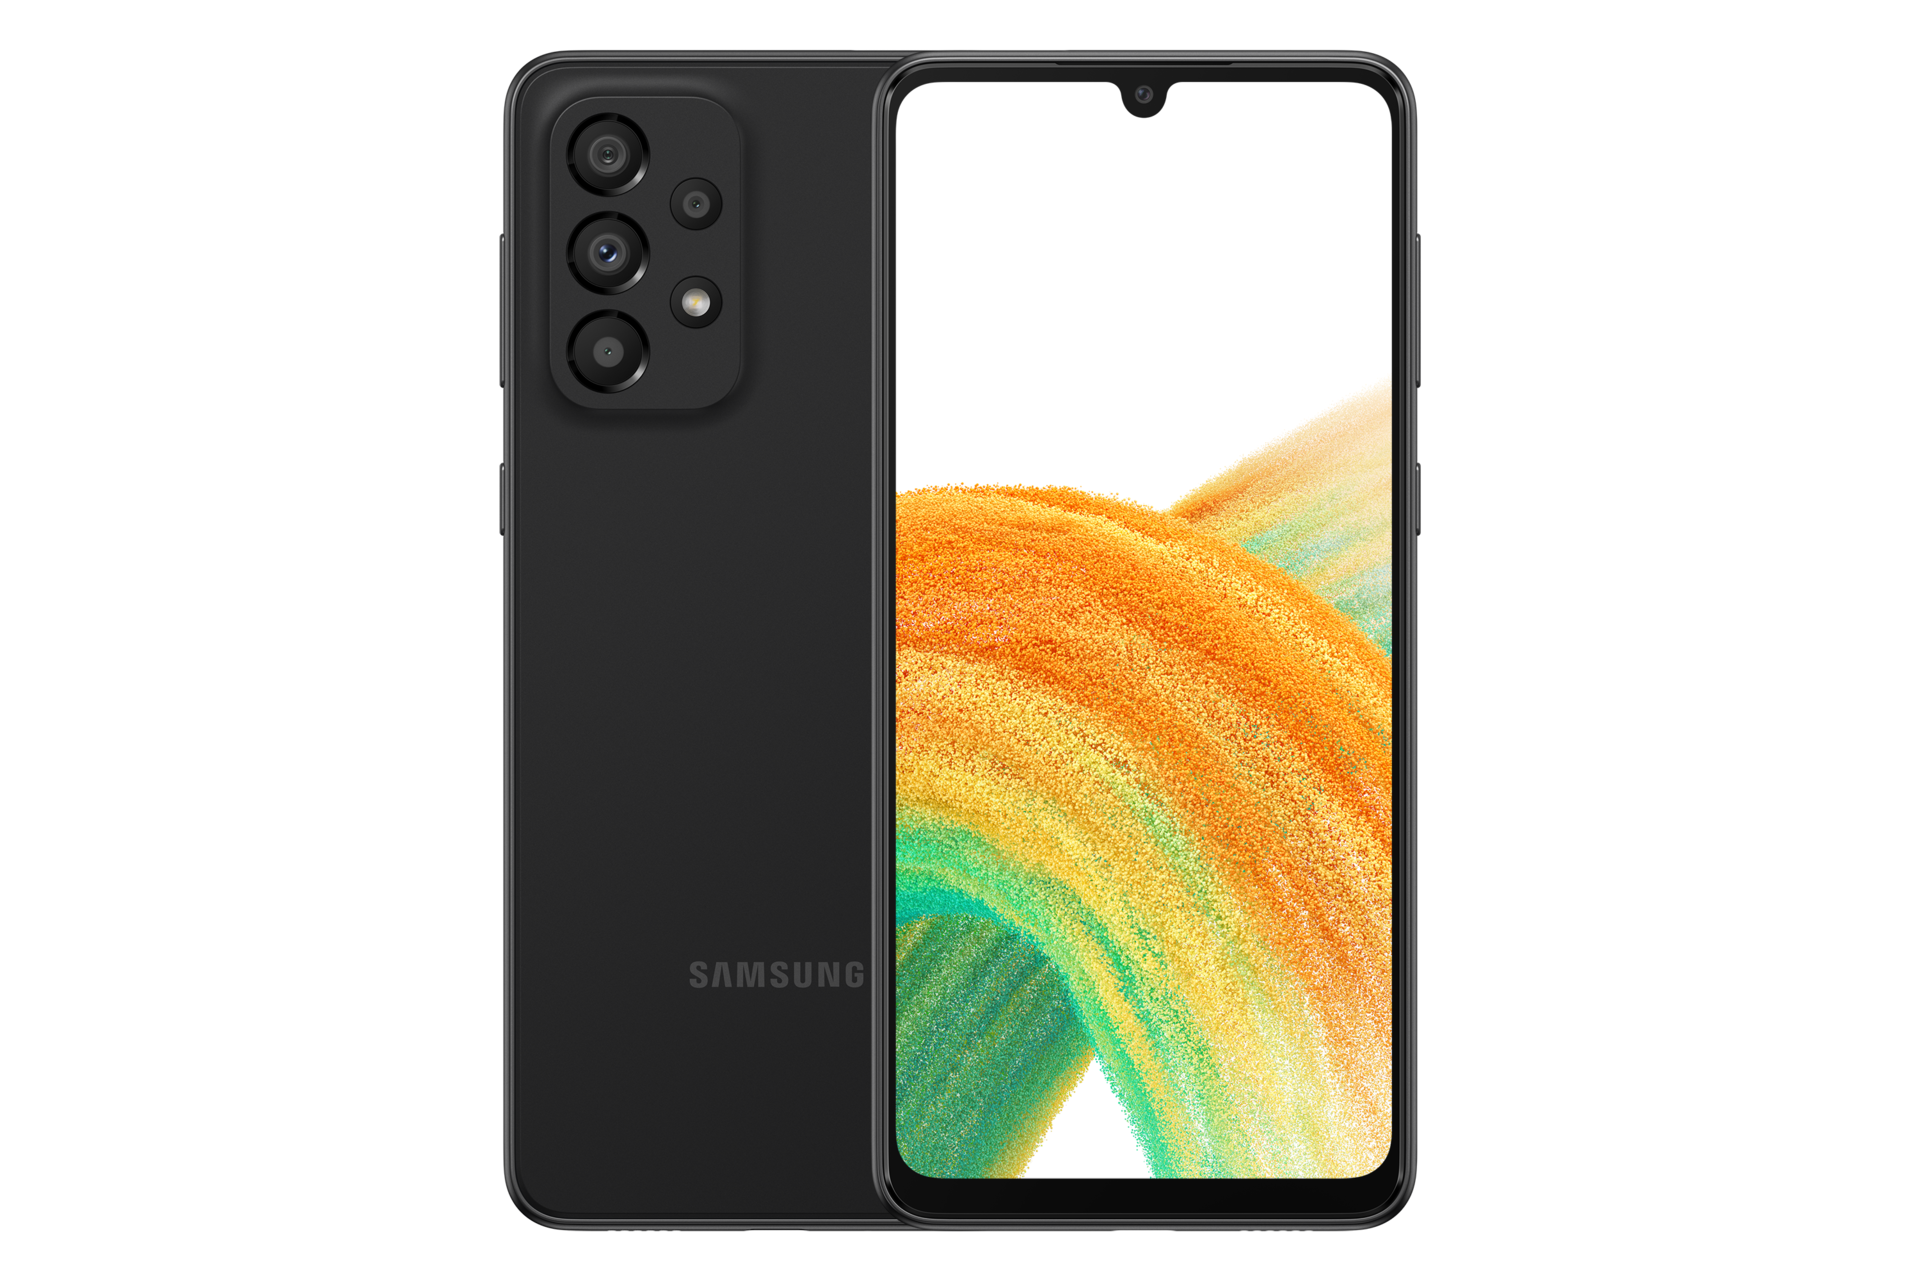 Buy Samsung Galaxy A33 5G (SM-A336EZKGXNZ) in Awesome Black Colour with best price, promo and offers at Samsung Official Store New Zealand.